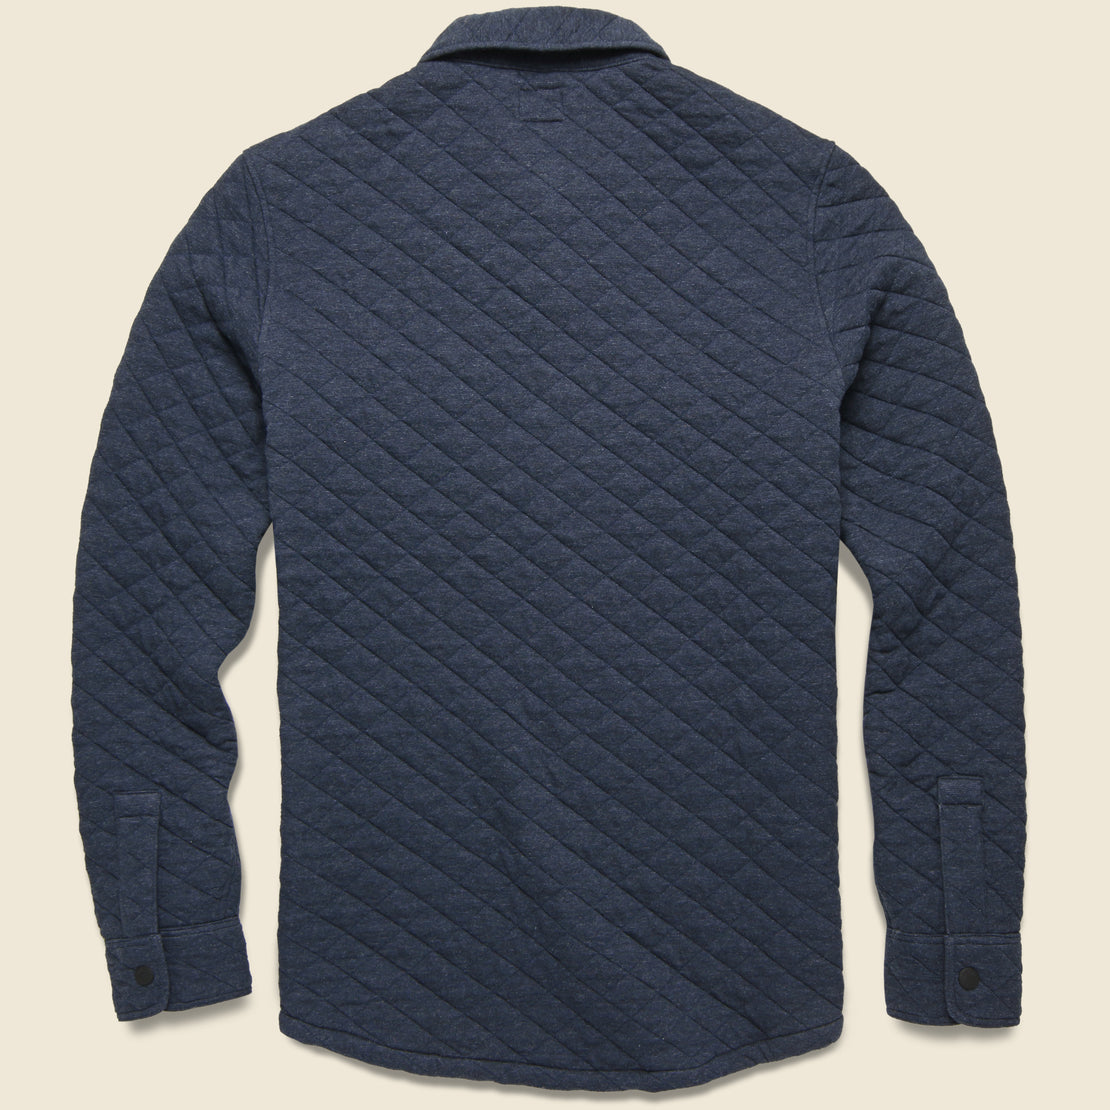 Epic Quilted Fleece CPO - Navy Melange - Faherty - STAG Provisions - Outerwear - Shirt Jacket